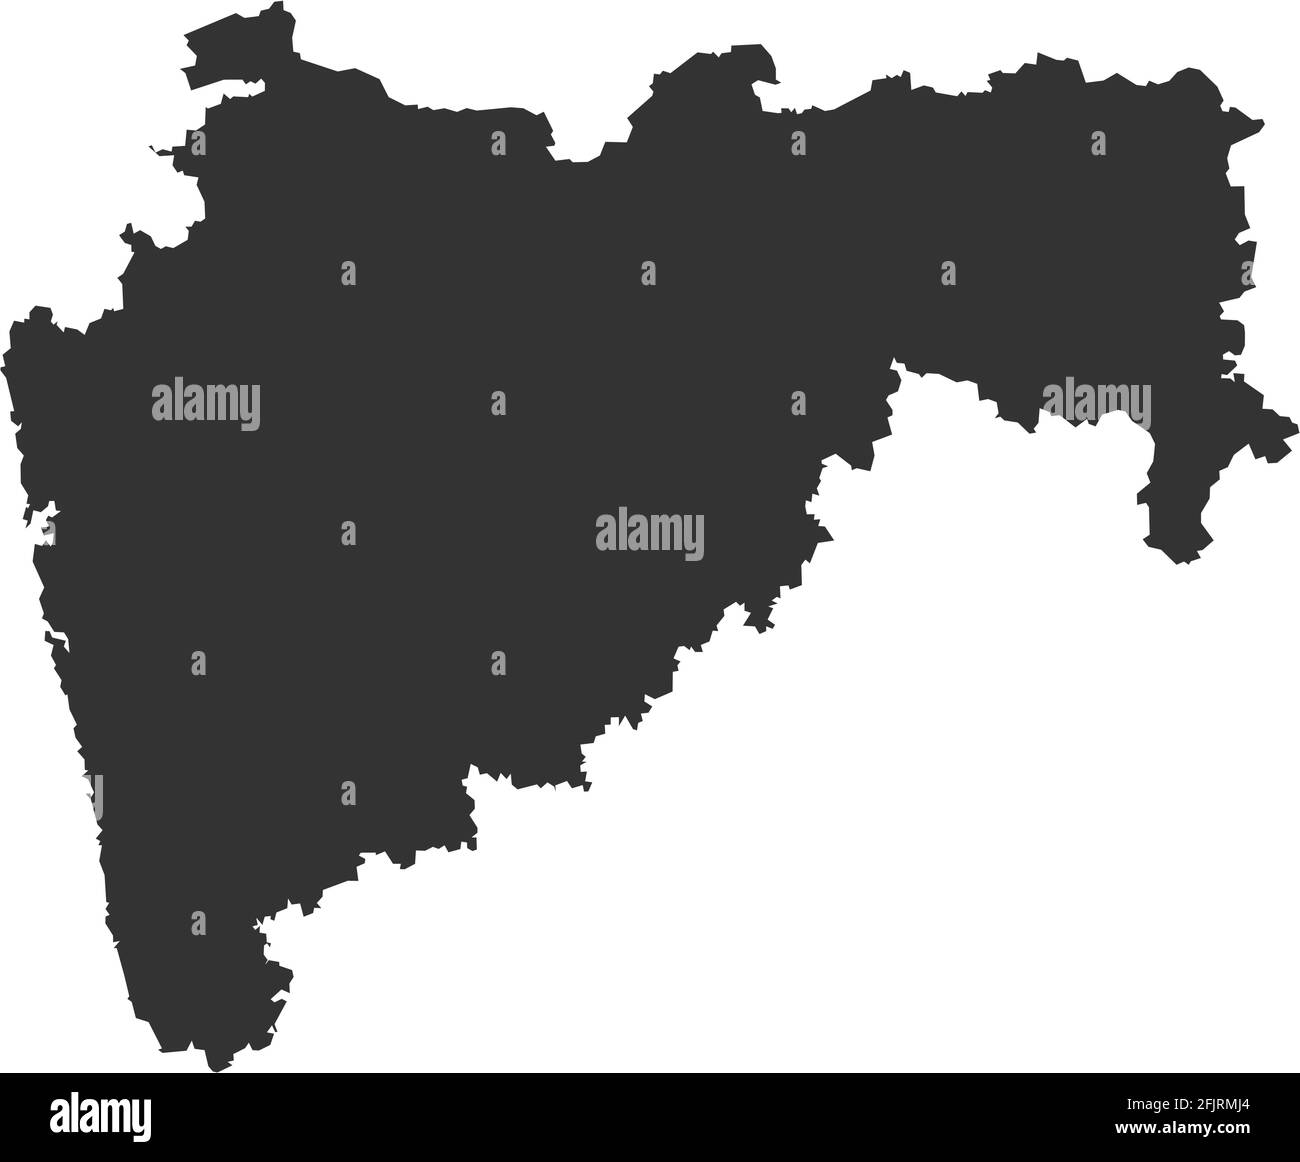 Maharashtra indian state map. Dark gray background. Business concepts graphics design. Stock Vector